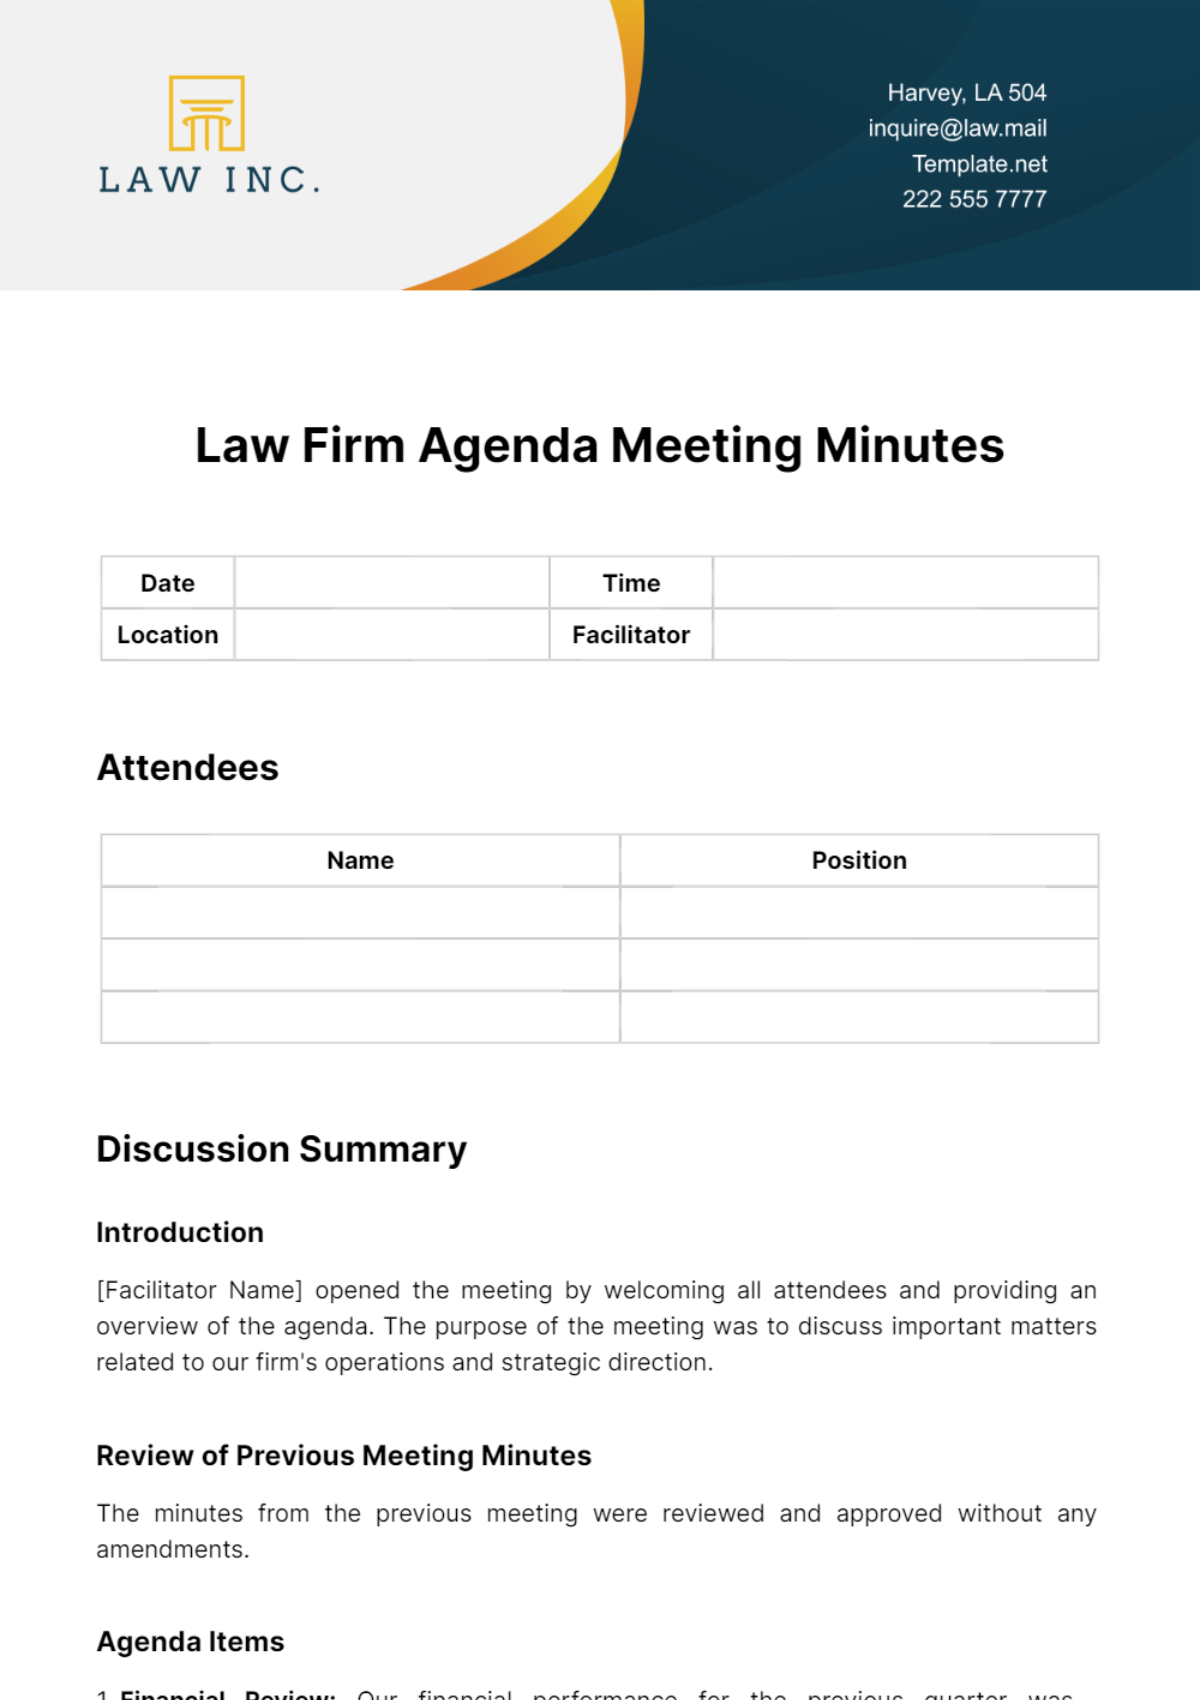 Law Firm Agenda Meeting Minutes Template